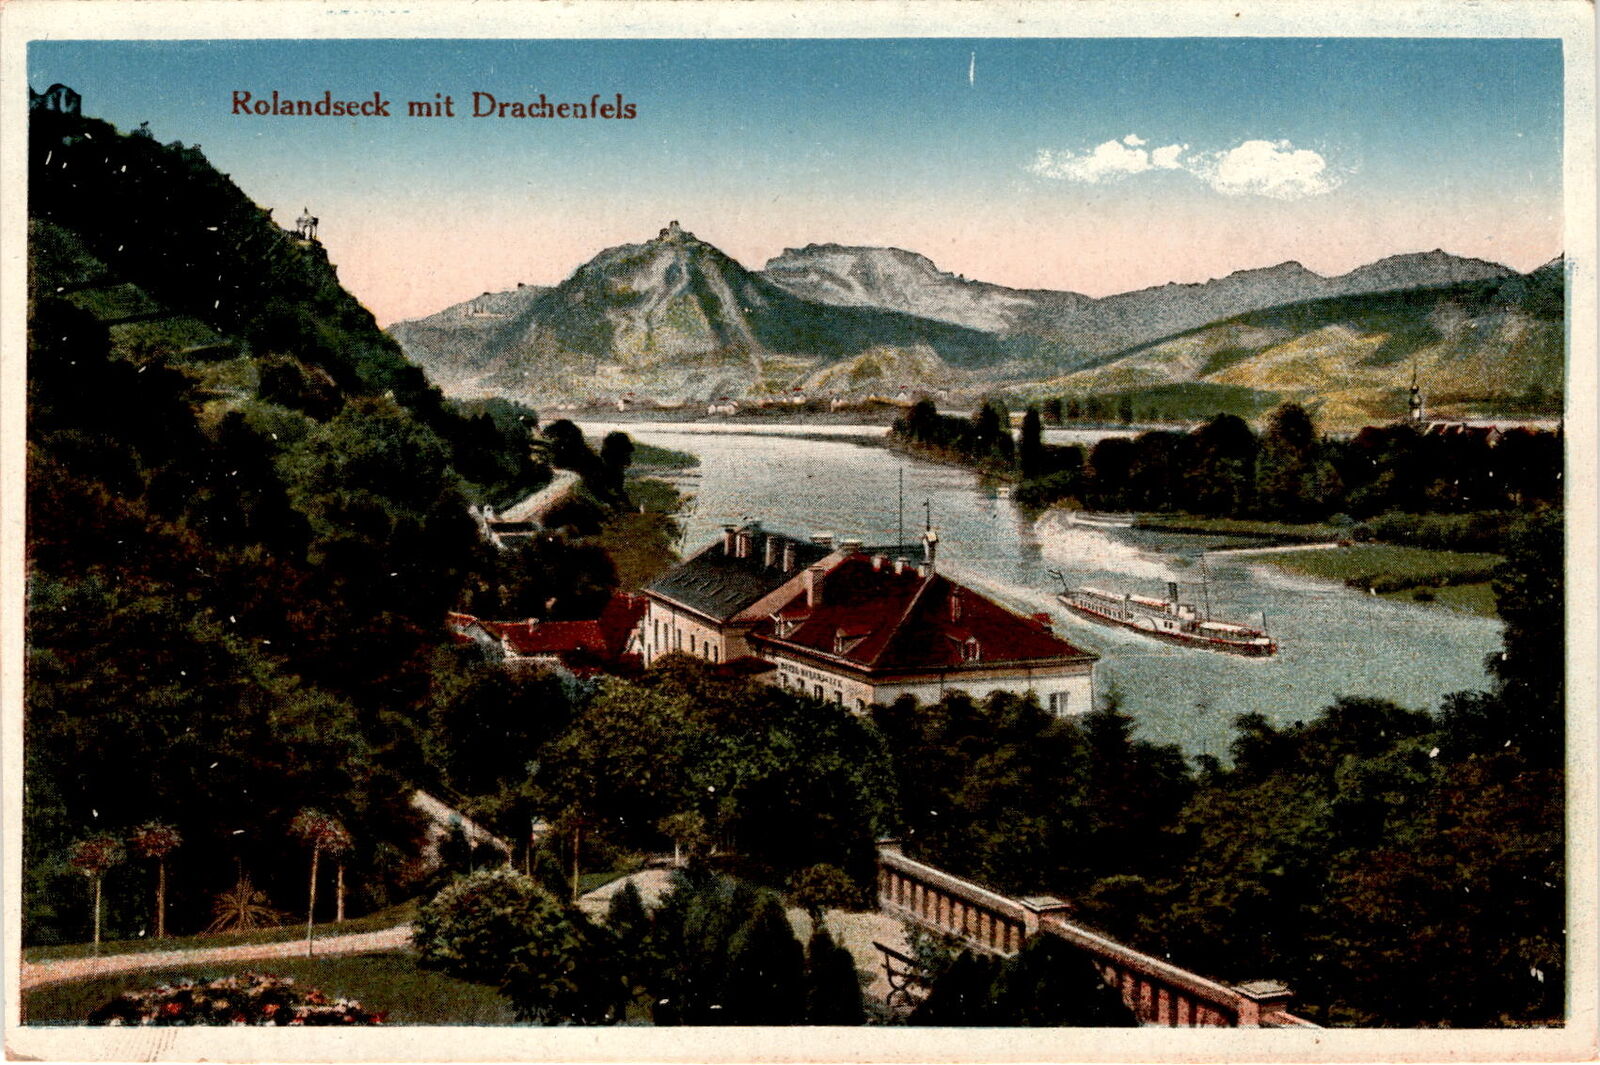 Postcard from Rolandseck mit Drachenfels; summary requested in CSV format.